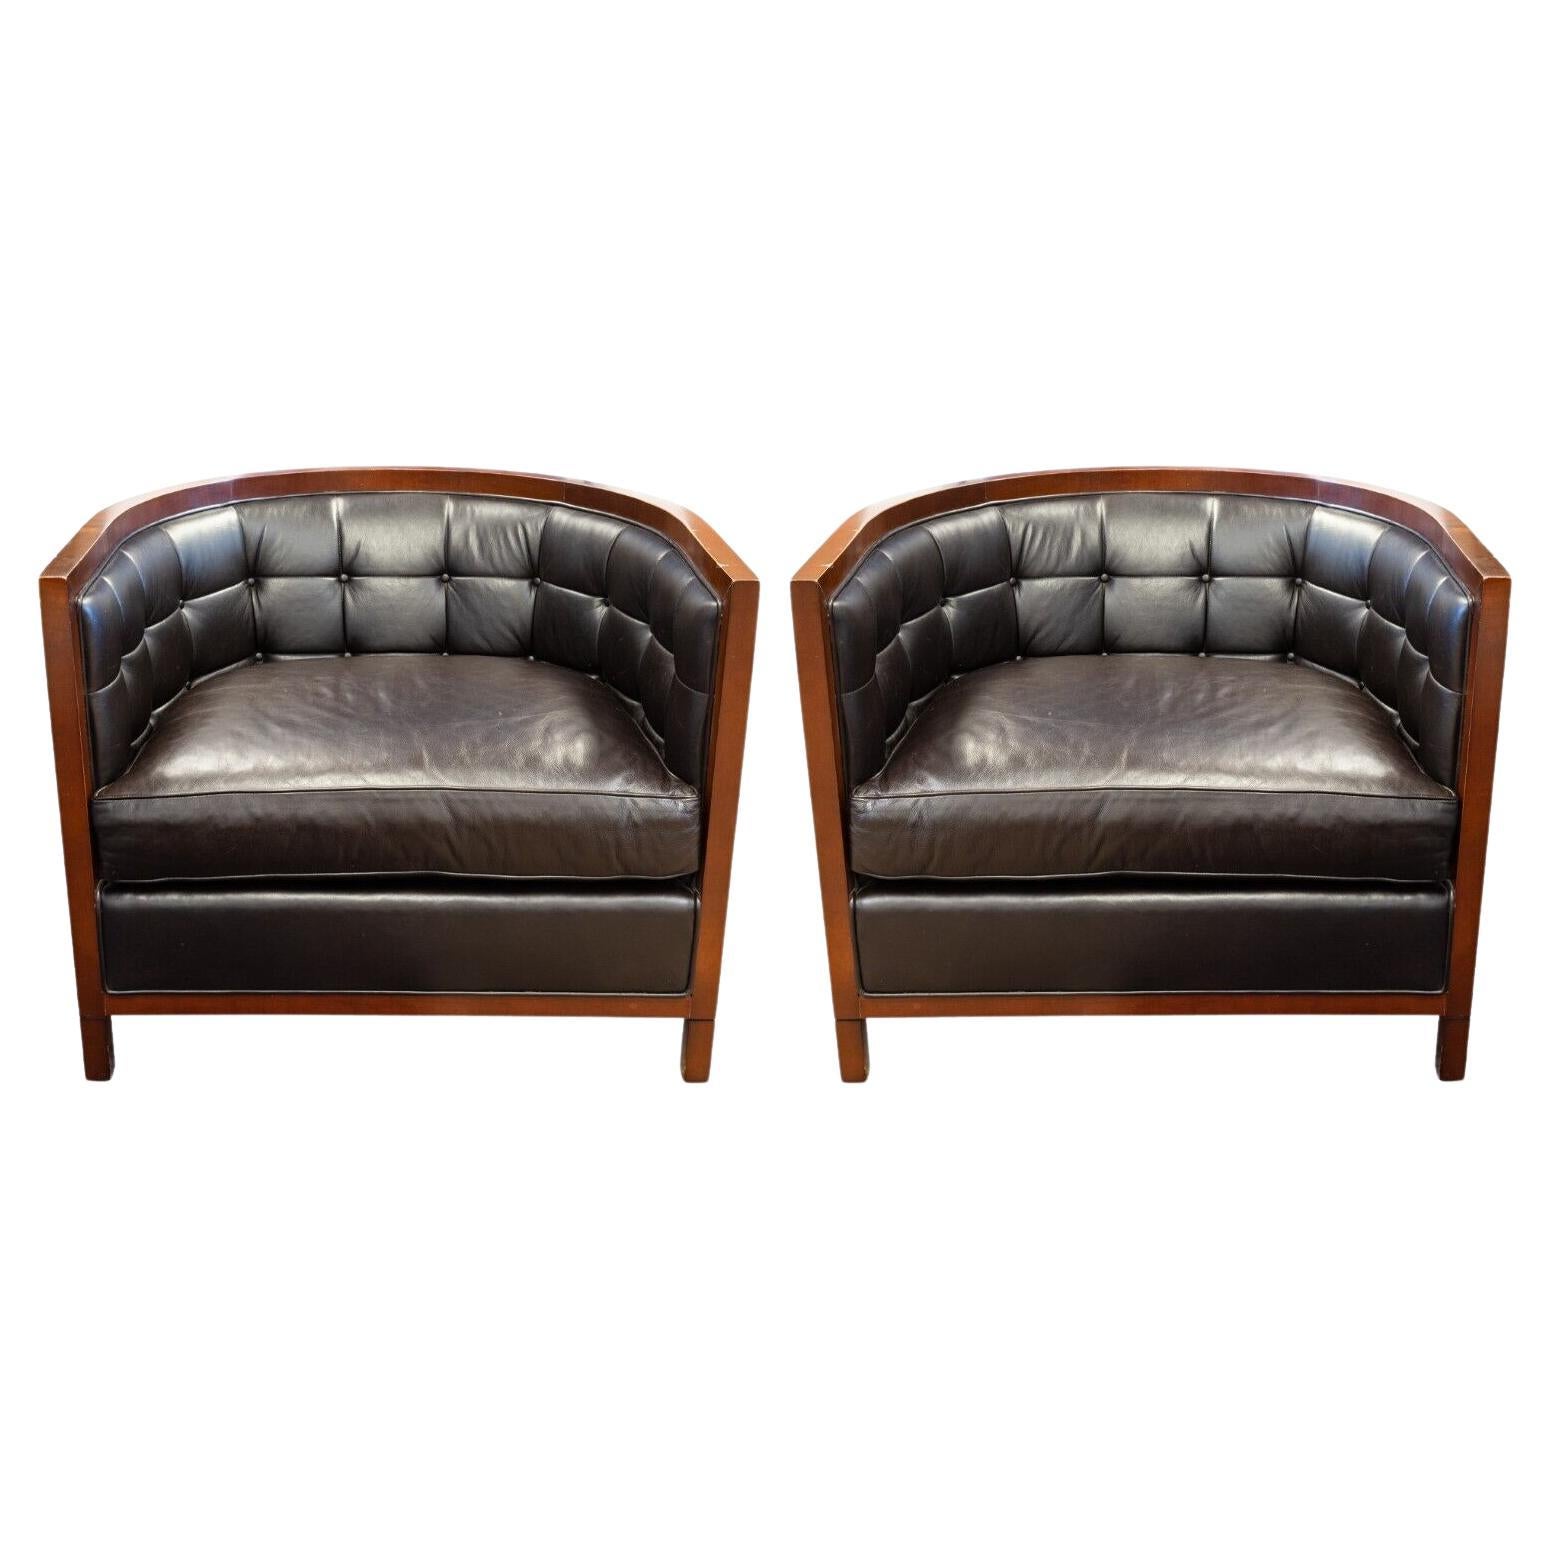 Pair of Baker Black Leather Tufted Curved Tub Chairs with Wood Trim